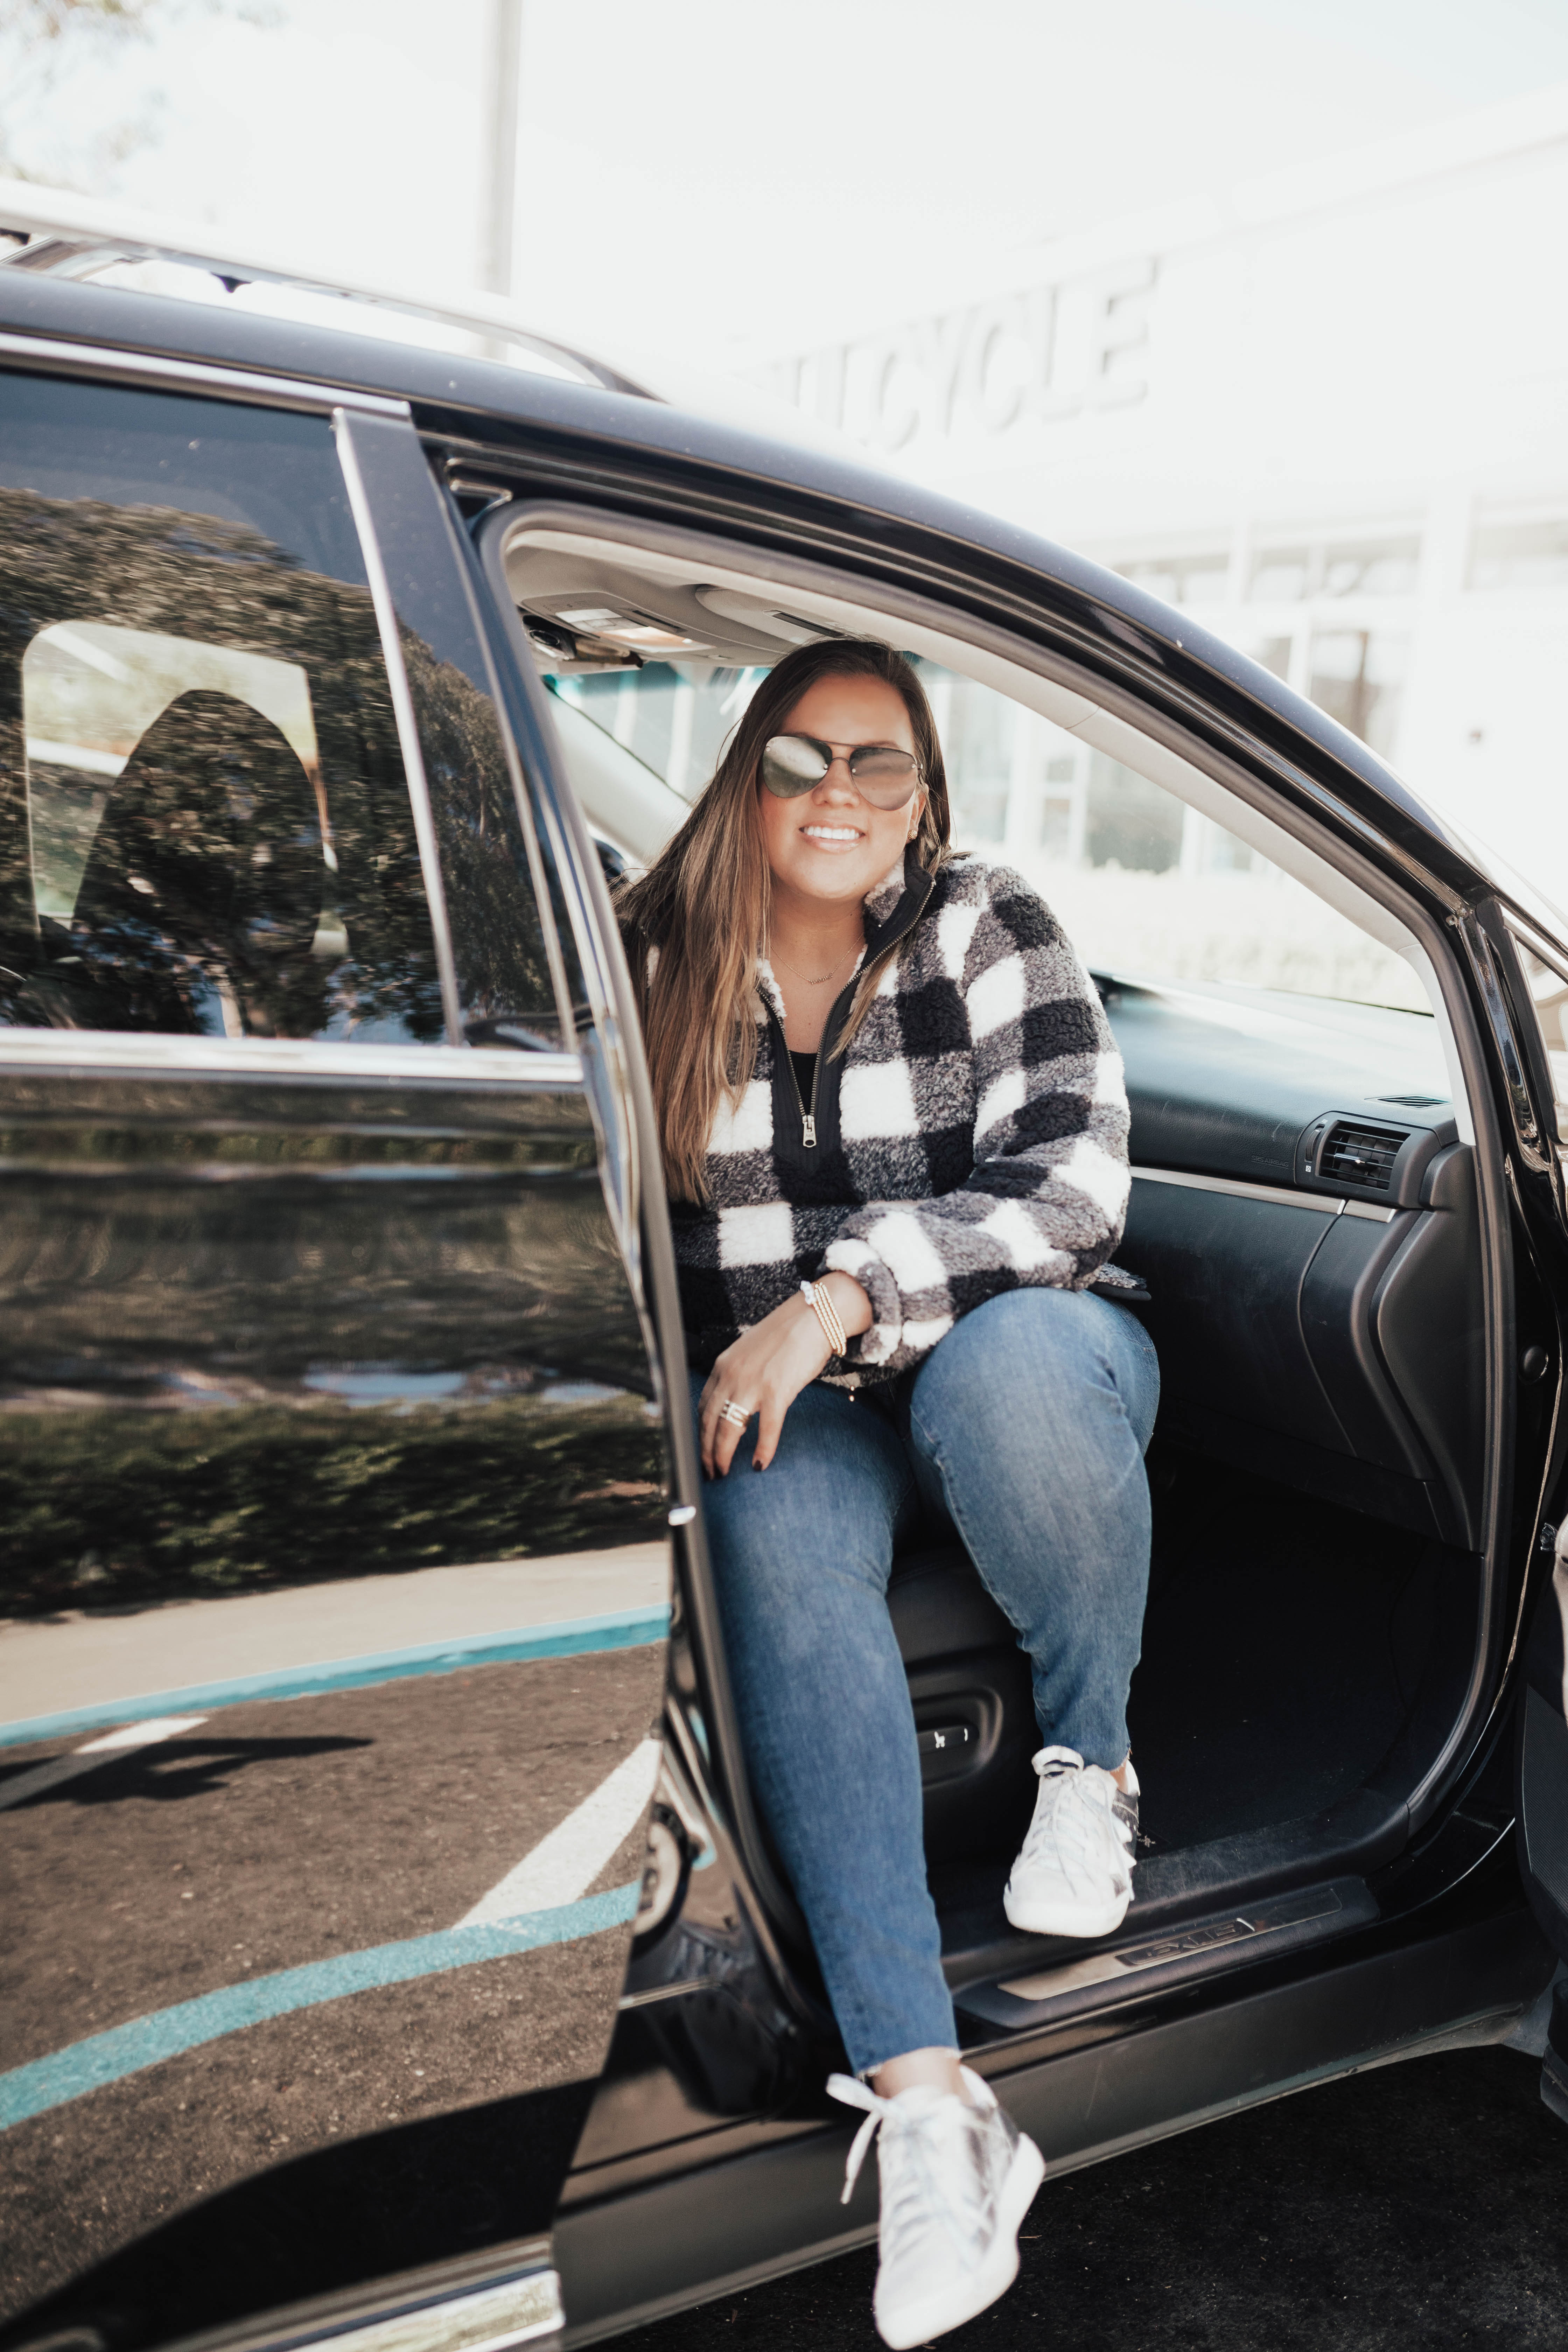 San Francisco blogger, Ashley Zeal, from Two Peas in a Prada teams up with Allstate to share about the Risky Roads in the Bay Area and what you can do about it!